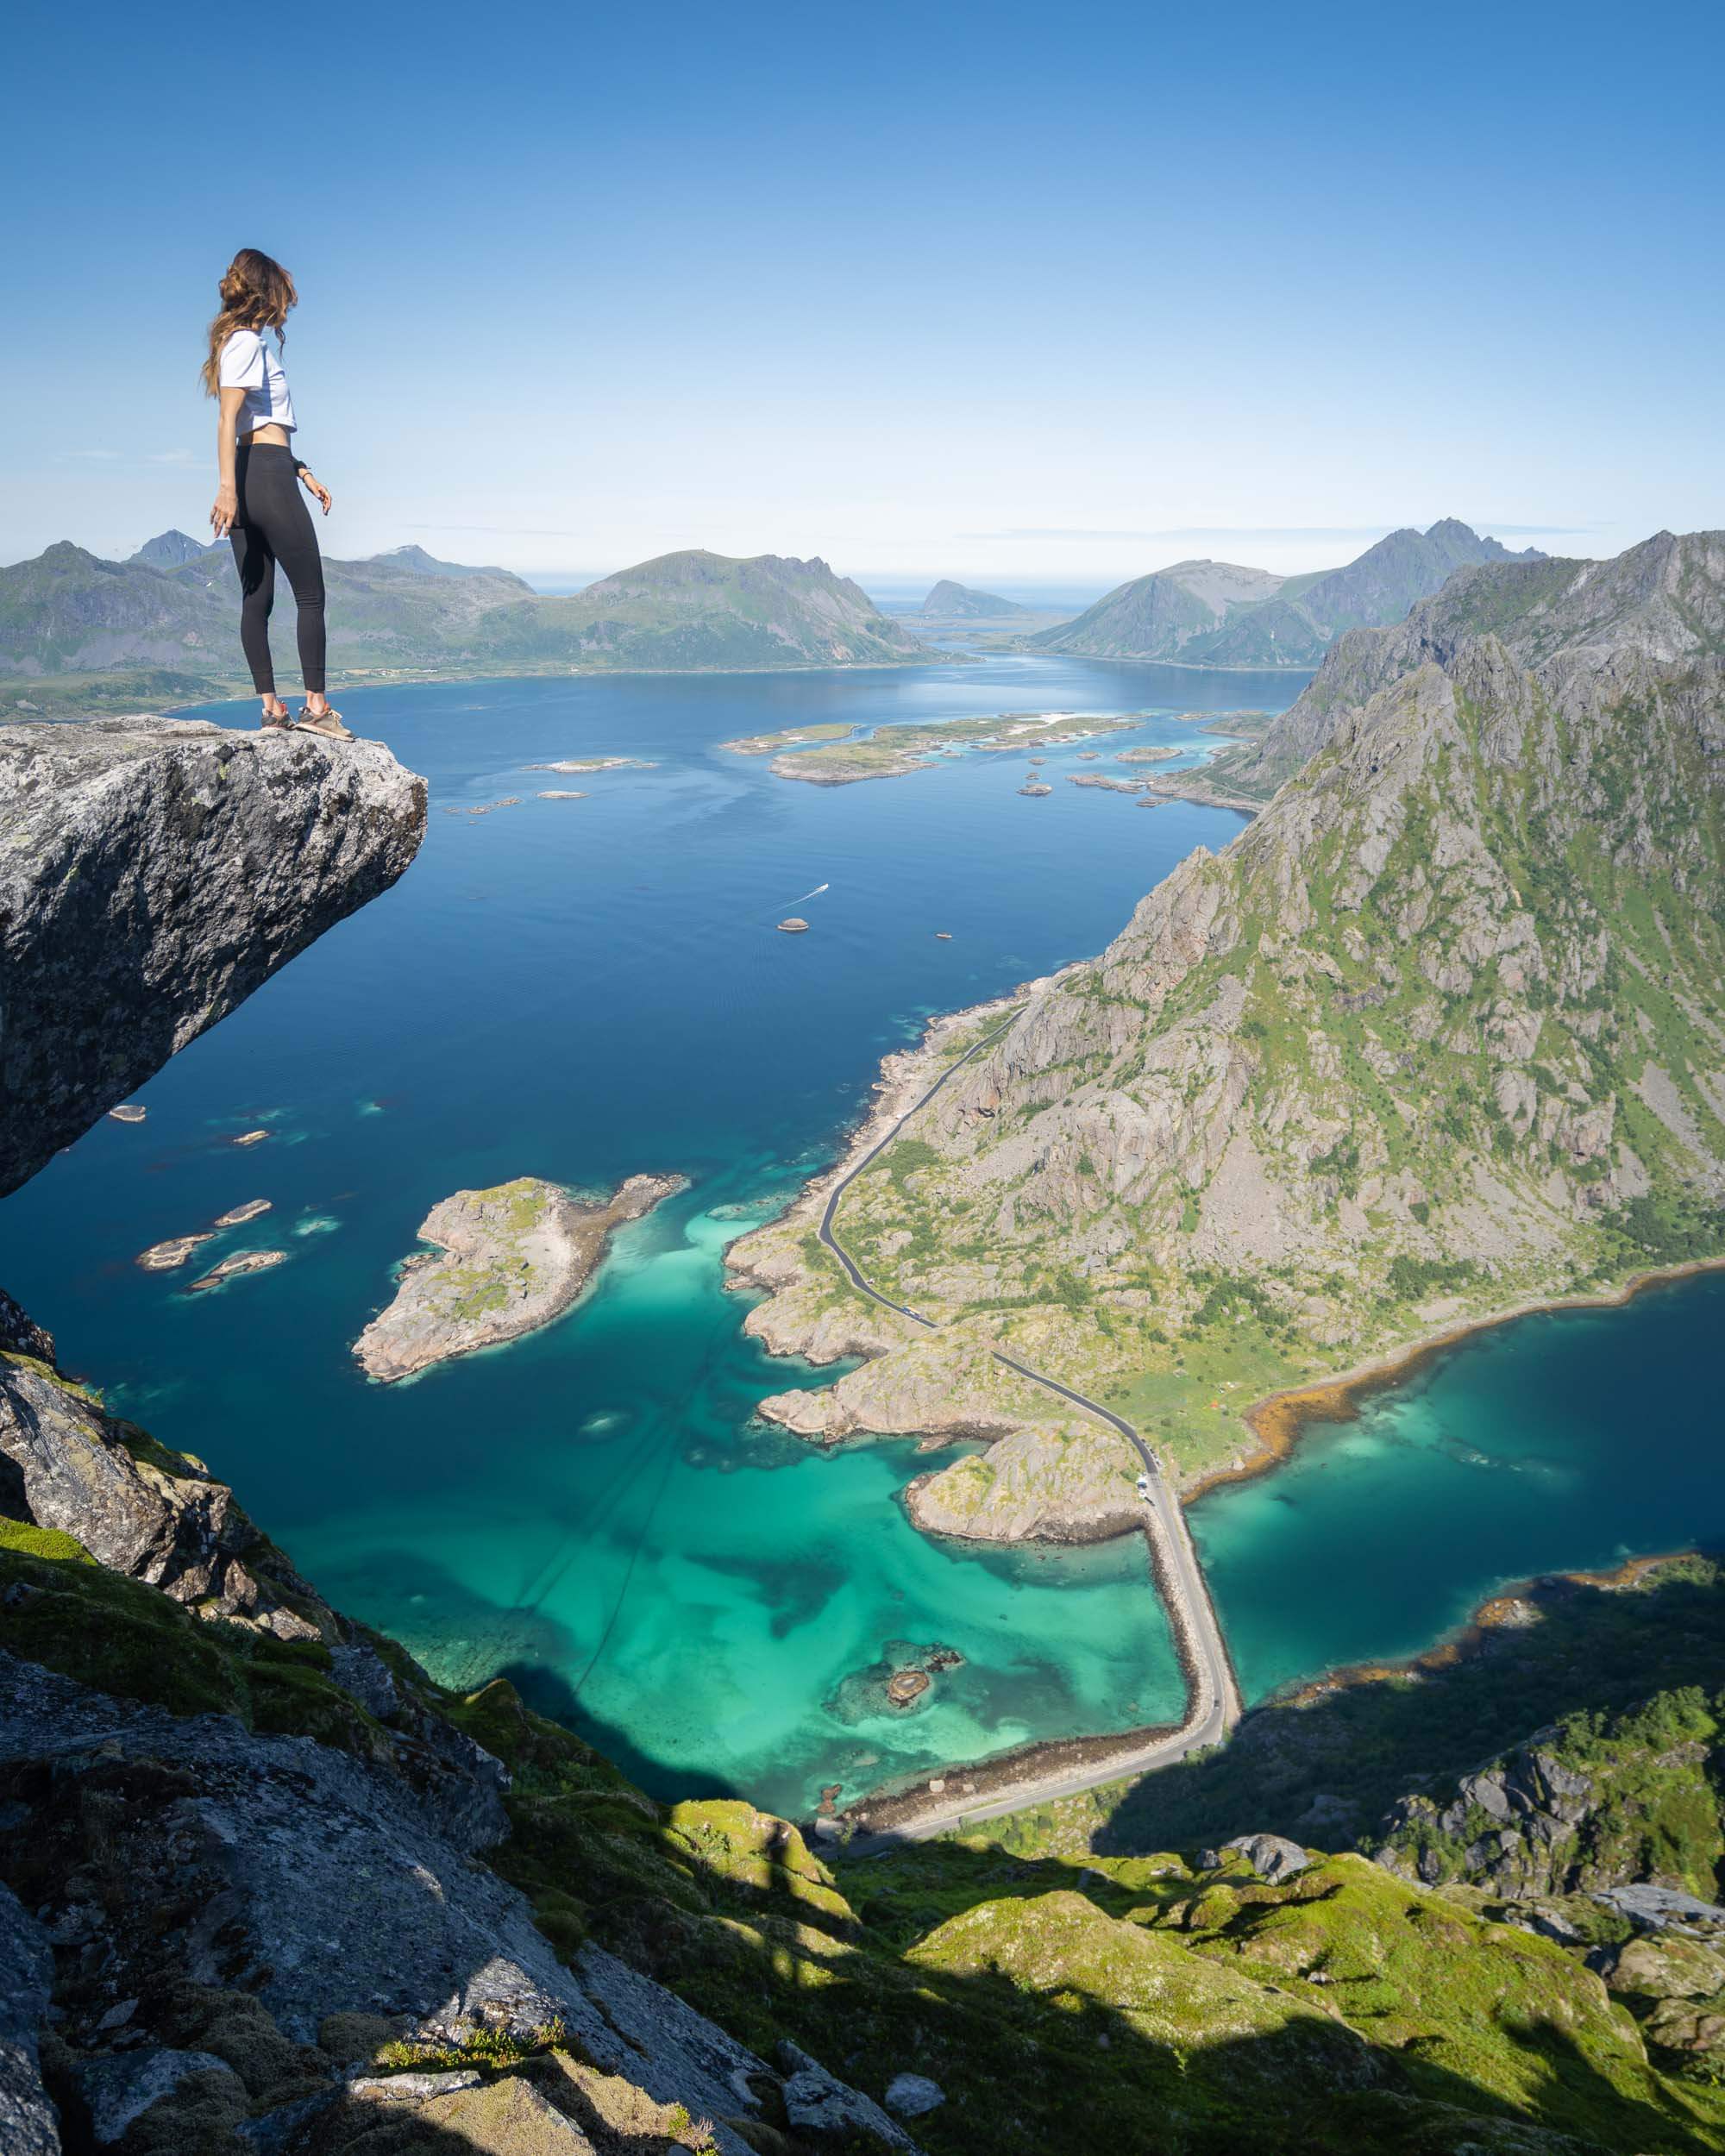 Jess Wandering standing on a rock overlooking the blue water and islands from Torsketunga hike in Norway